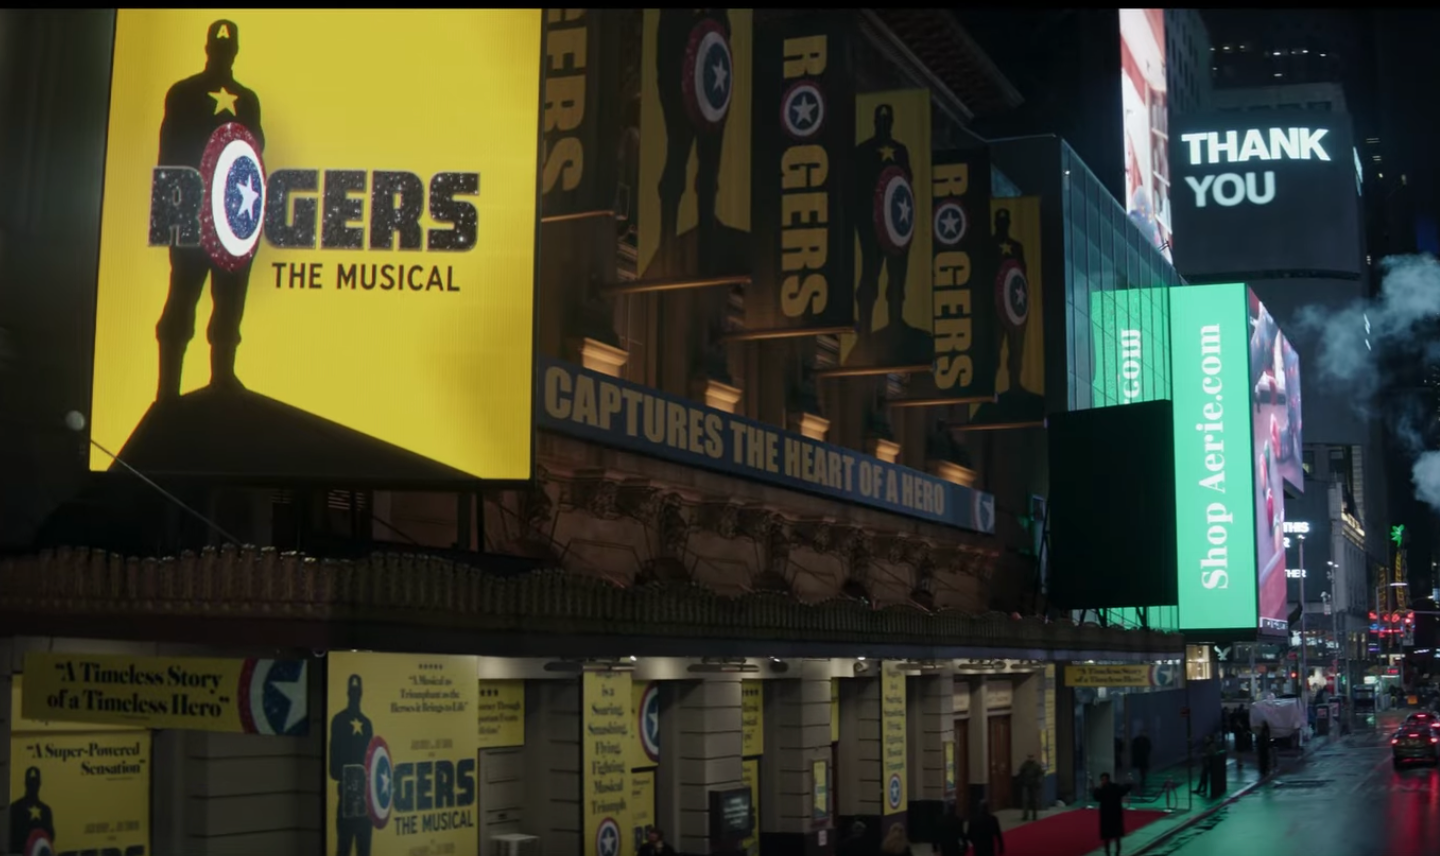 The trailer for ‘Hawkeye’ introduces the fictional ‘Rogers: The Musical’, a theatre play about Captain America